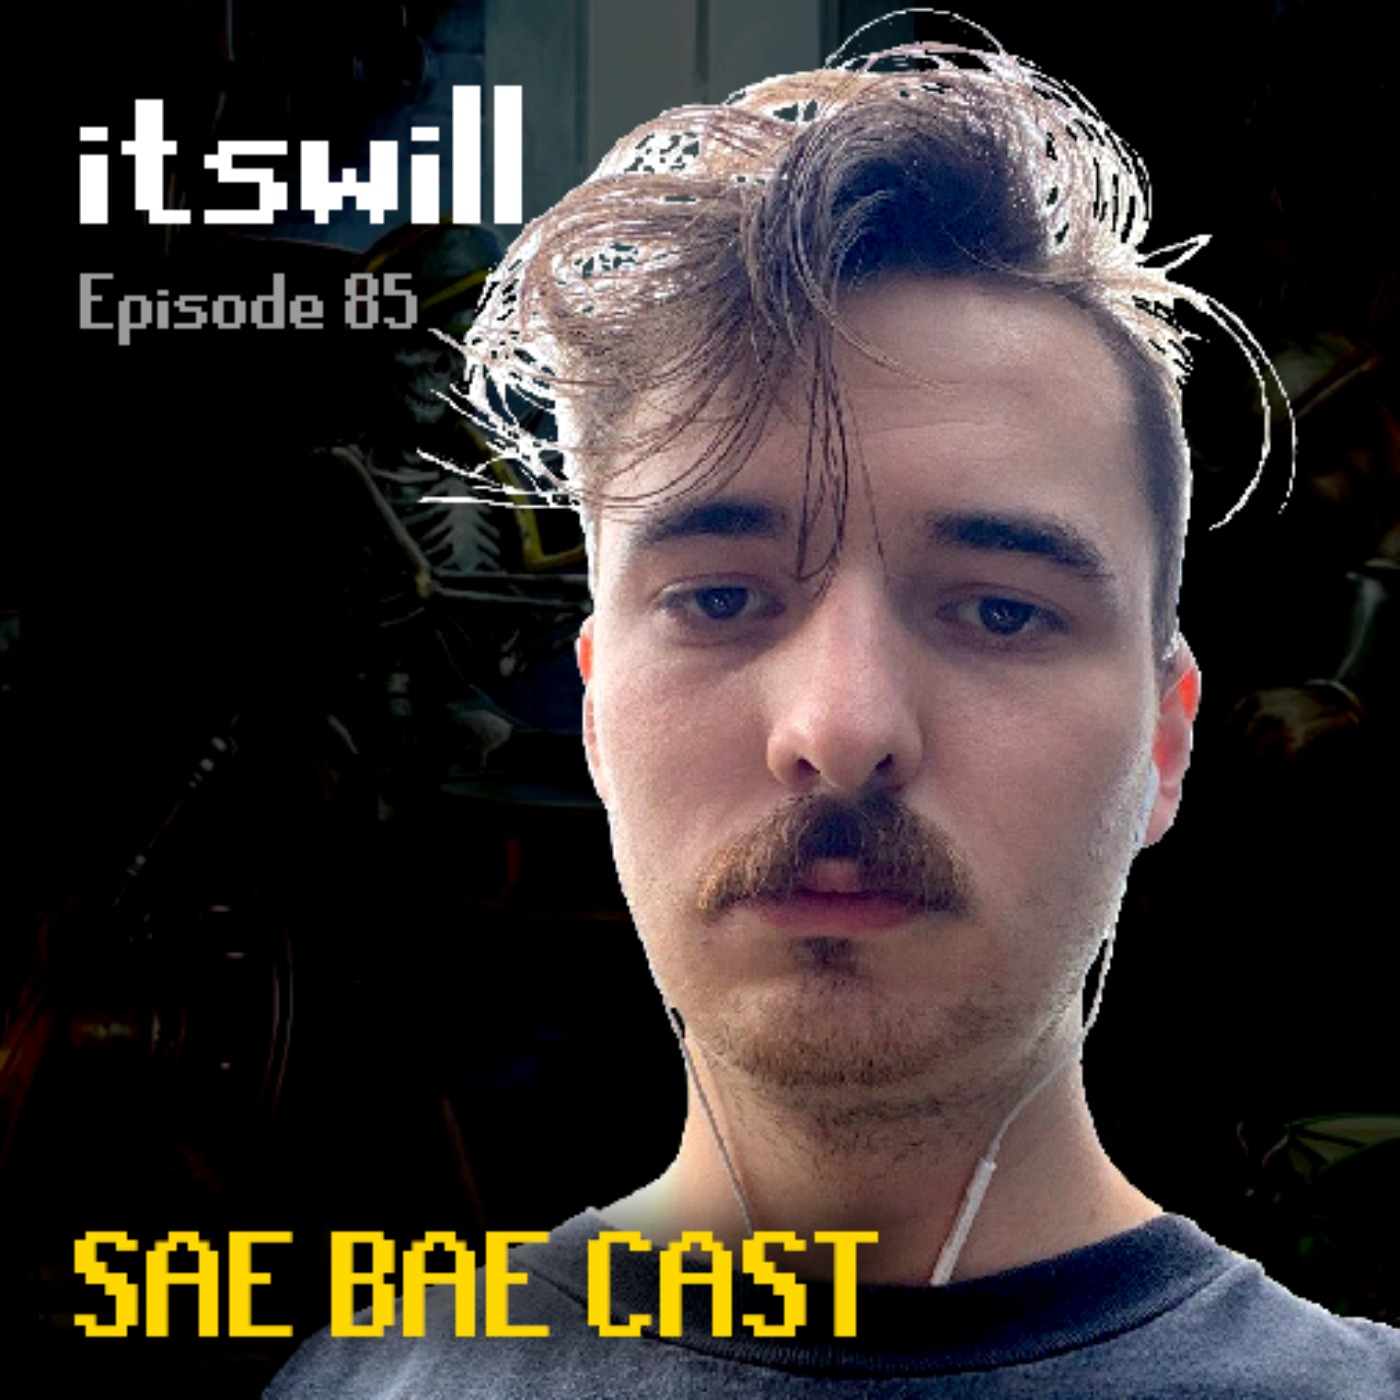 itswill - Starting a Cult, Dry Streaks, Raids 1, 2 & 3, Gimmicks, Twitch Chatters | Sae Bae Cast 85